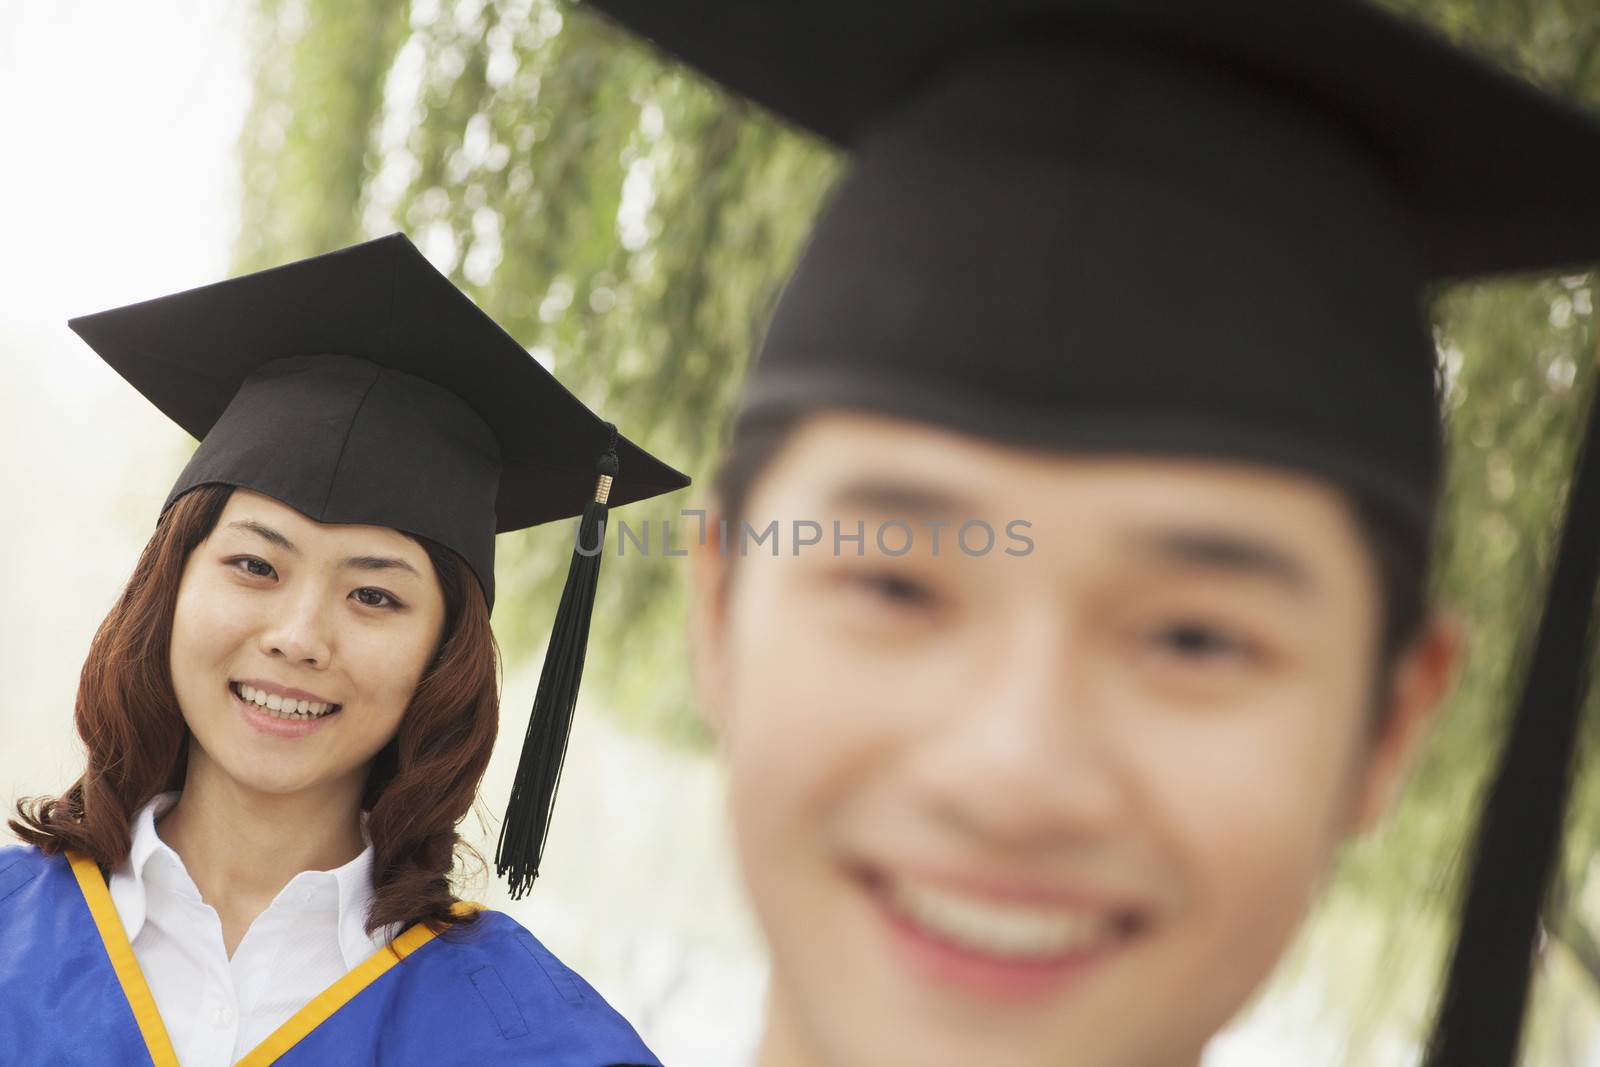 Two Young University Graduates Looking At The Camera, Man in Front